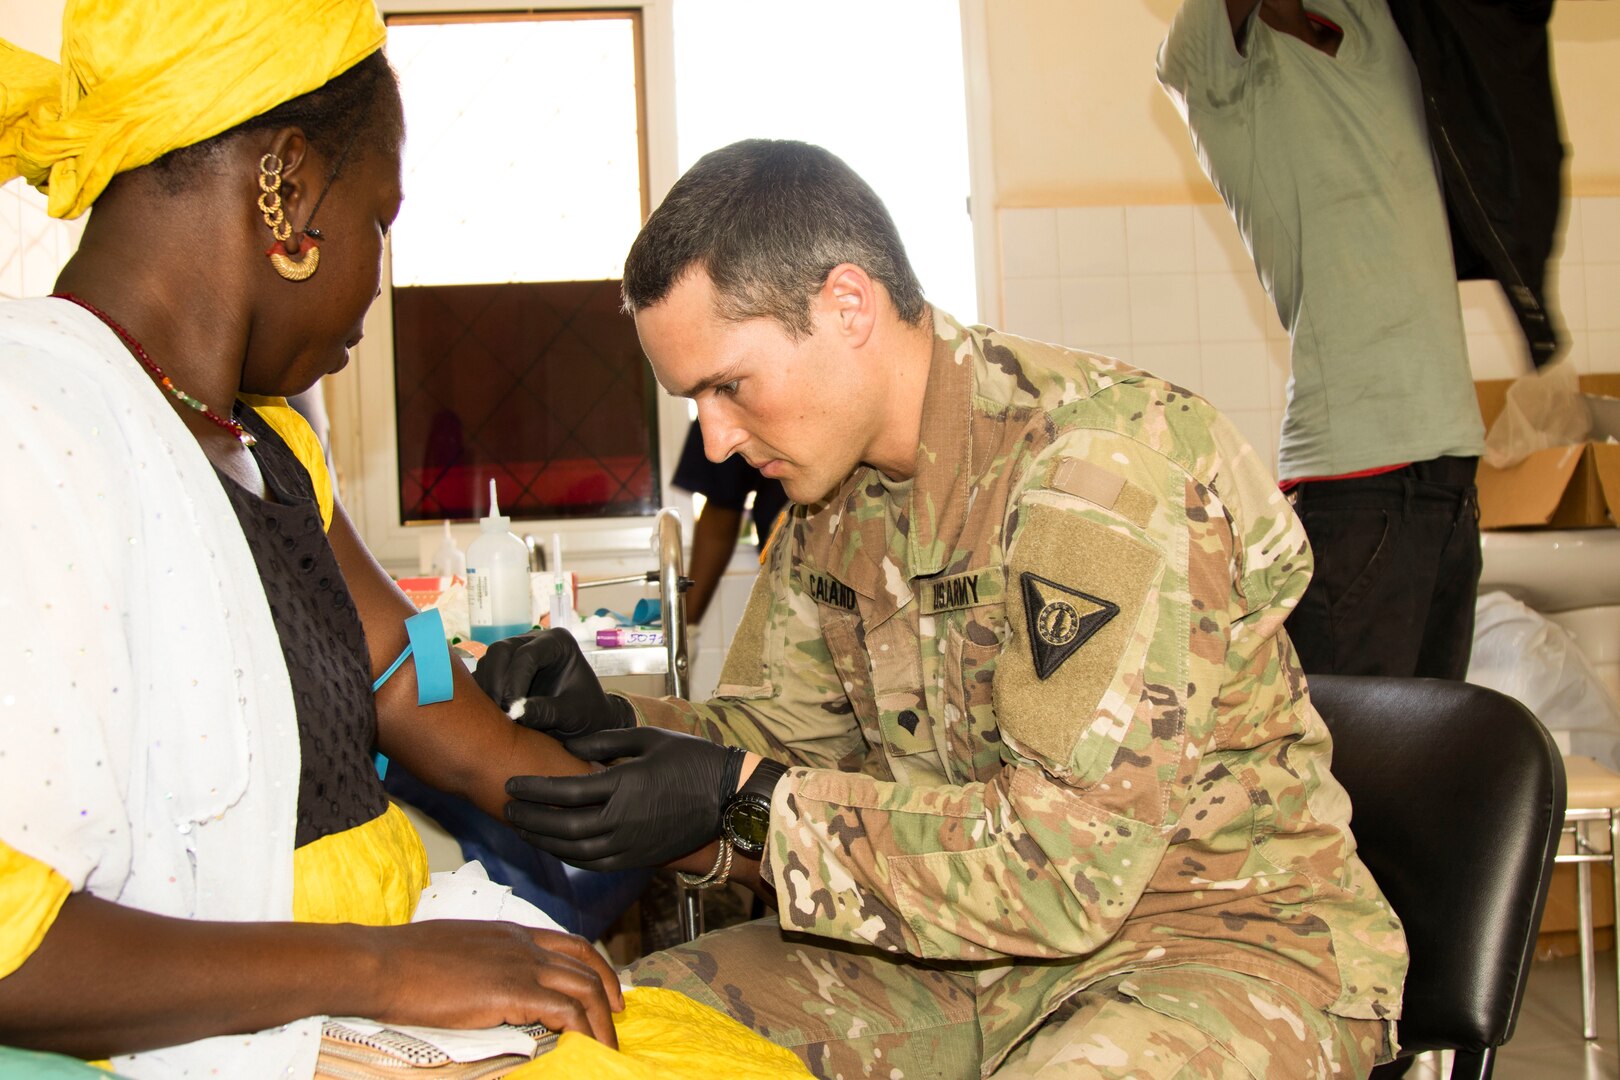 U.S. Army Spc. Joseph Calano, medic, Medical Detachment, Garrison Support Command, Vermont National Guard, draws blood from a patient at the Regional Center Hospital at Tambacounda, Senegal, April 9, 2019. Vermont Guardsmen and their Senegalese counterparts  provide the Department of Defense with cost-effective ways to strengthen alliances and attract new partners.